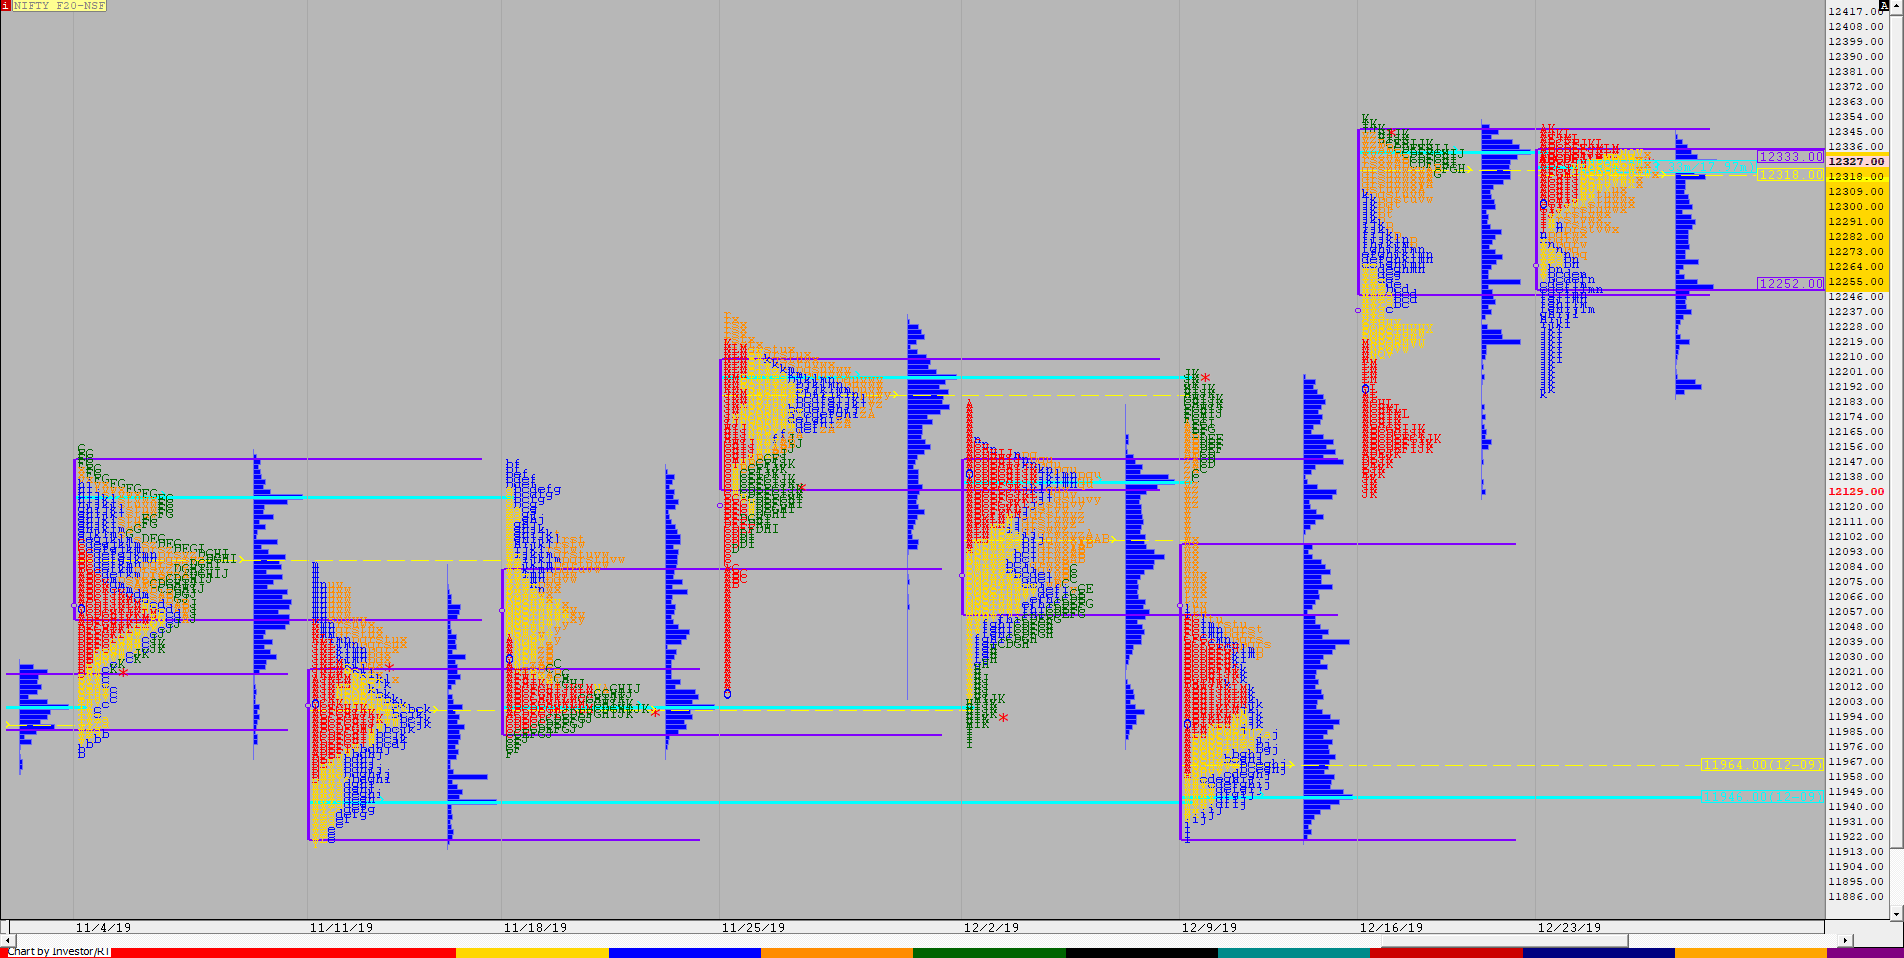 Nf F 4 Weekly Charts (23Rd To 27Th December) And Market Profile Analysis Banknifty Futures, Charts, Day Trading, Intraday Trading, Intraday Trading Strategies, Market Profile, Market Profile Trading Strategies, Nifty Futures, Order Flow Analysis, Support And Resistance, Technical Analysis, Trading Strategies, Volume Profile Trading